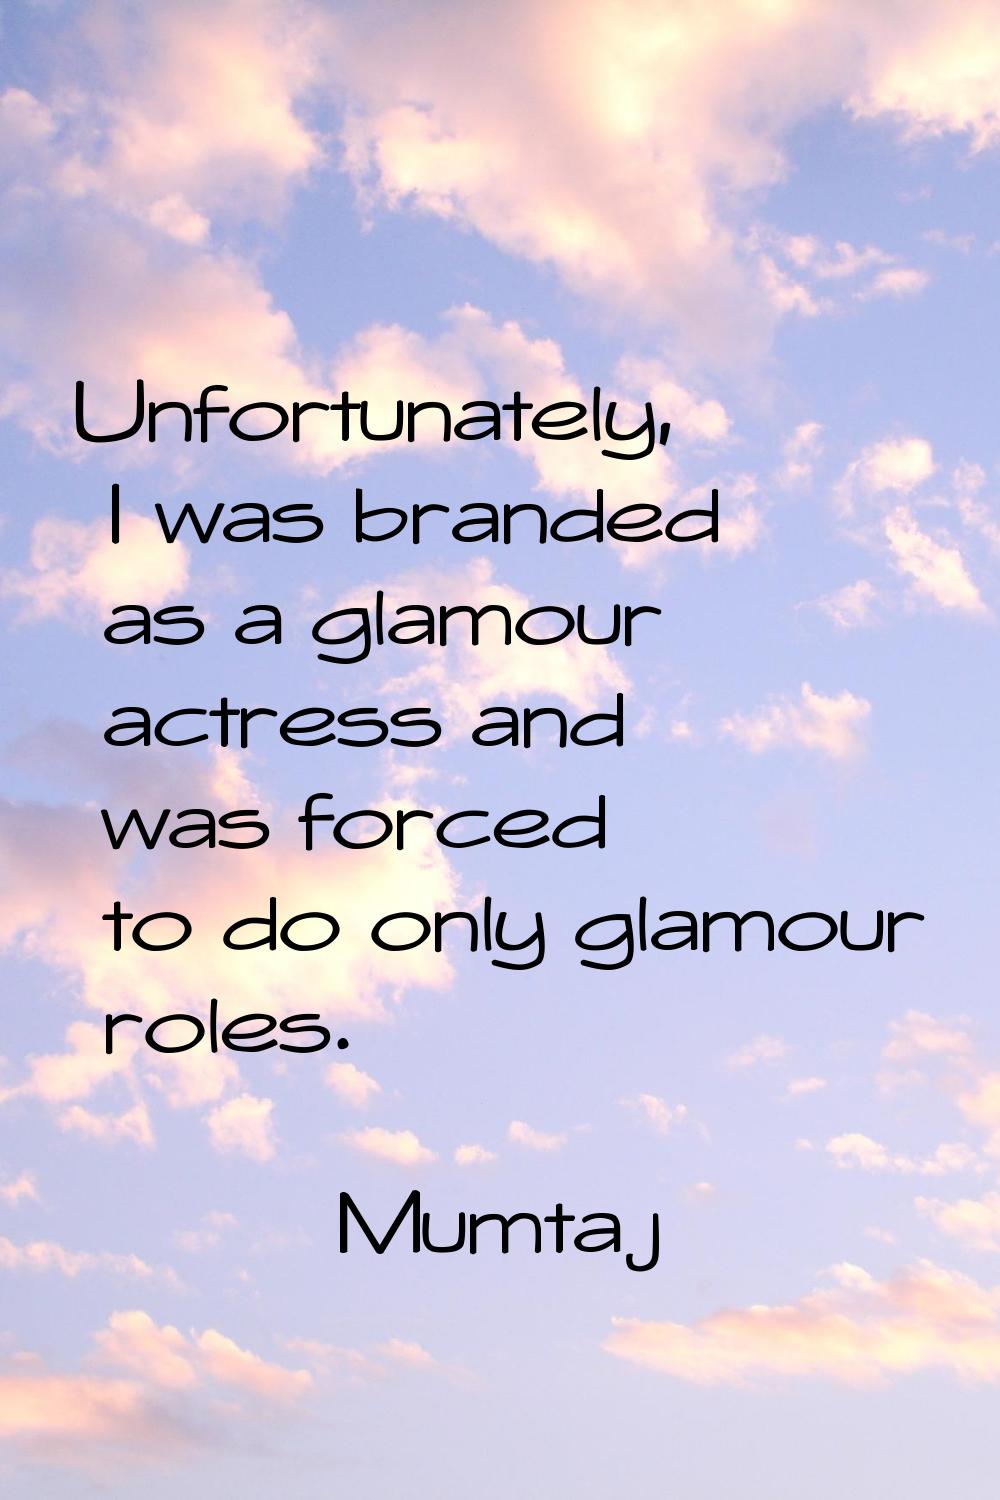 Unfortunately, I was branded as a glamour actress and was forced to do only glamour roles.